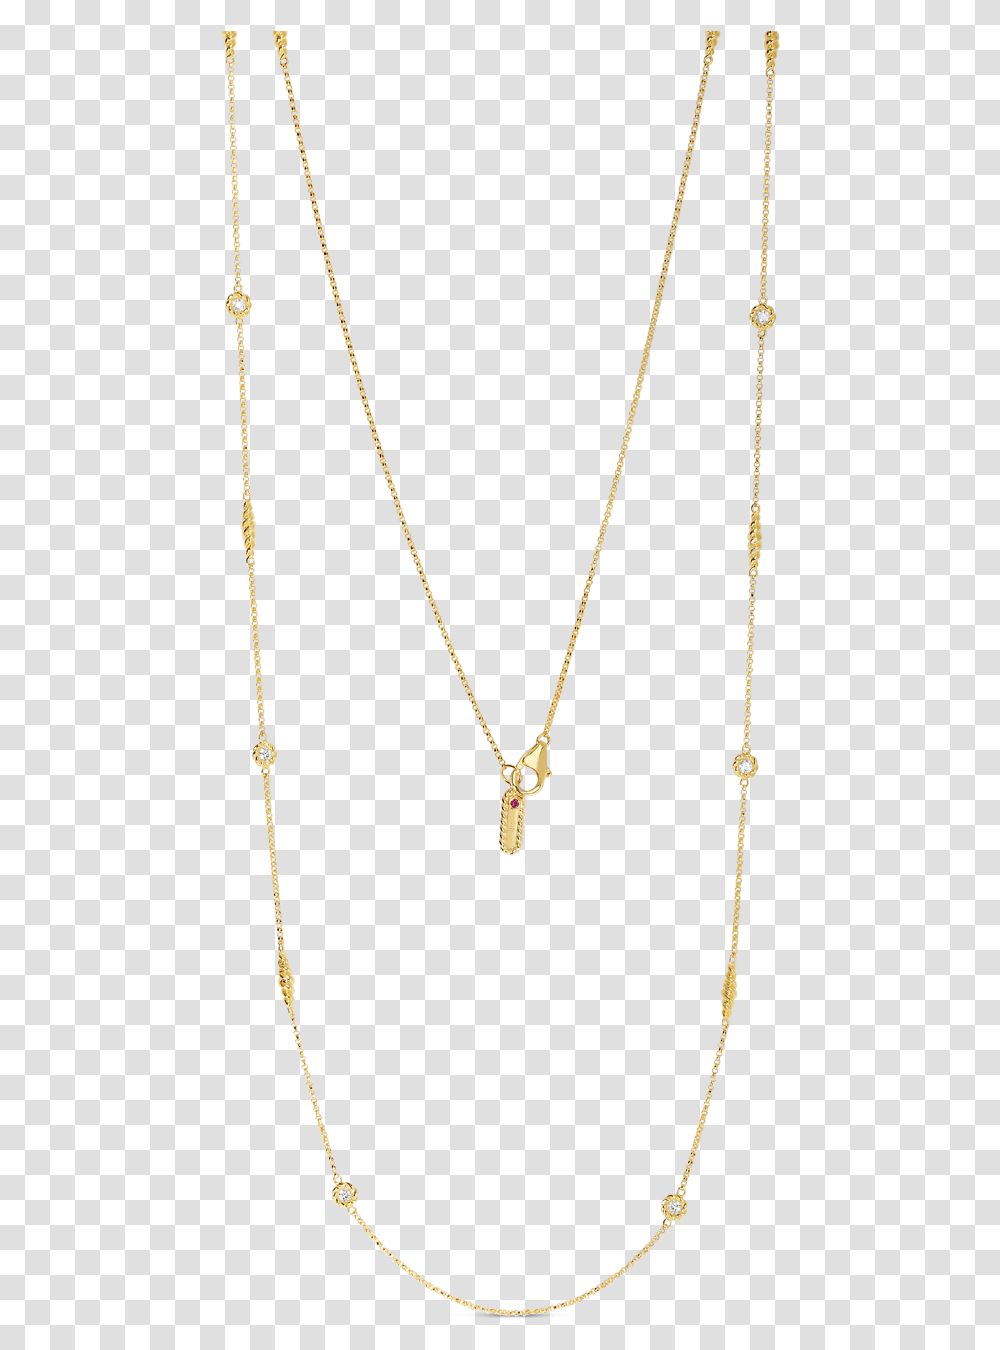 Necklace Roblox Locket, Jewelry, Accessories, Accessory, Pendant Transparent Png